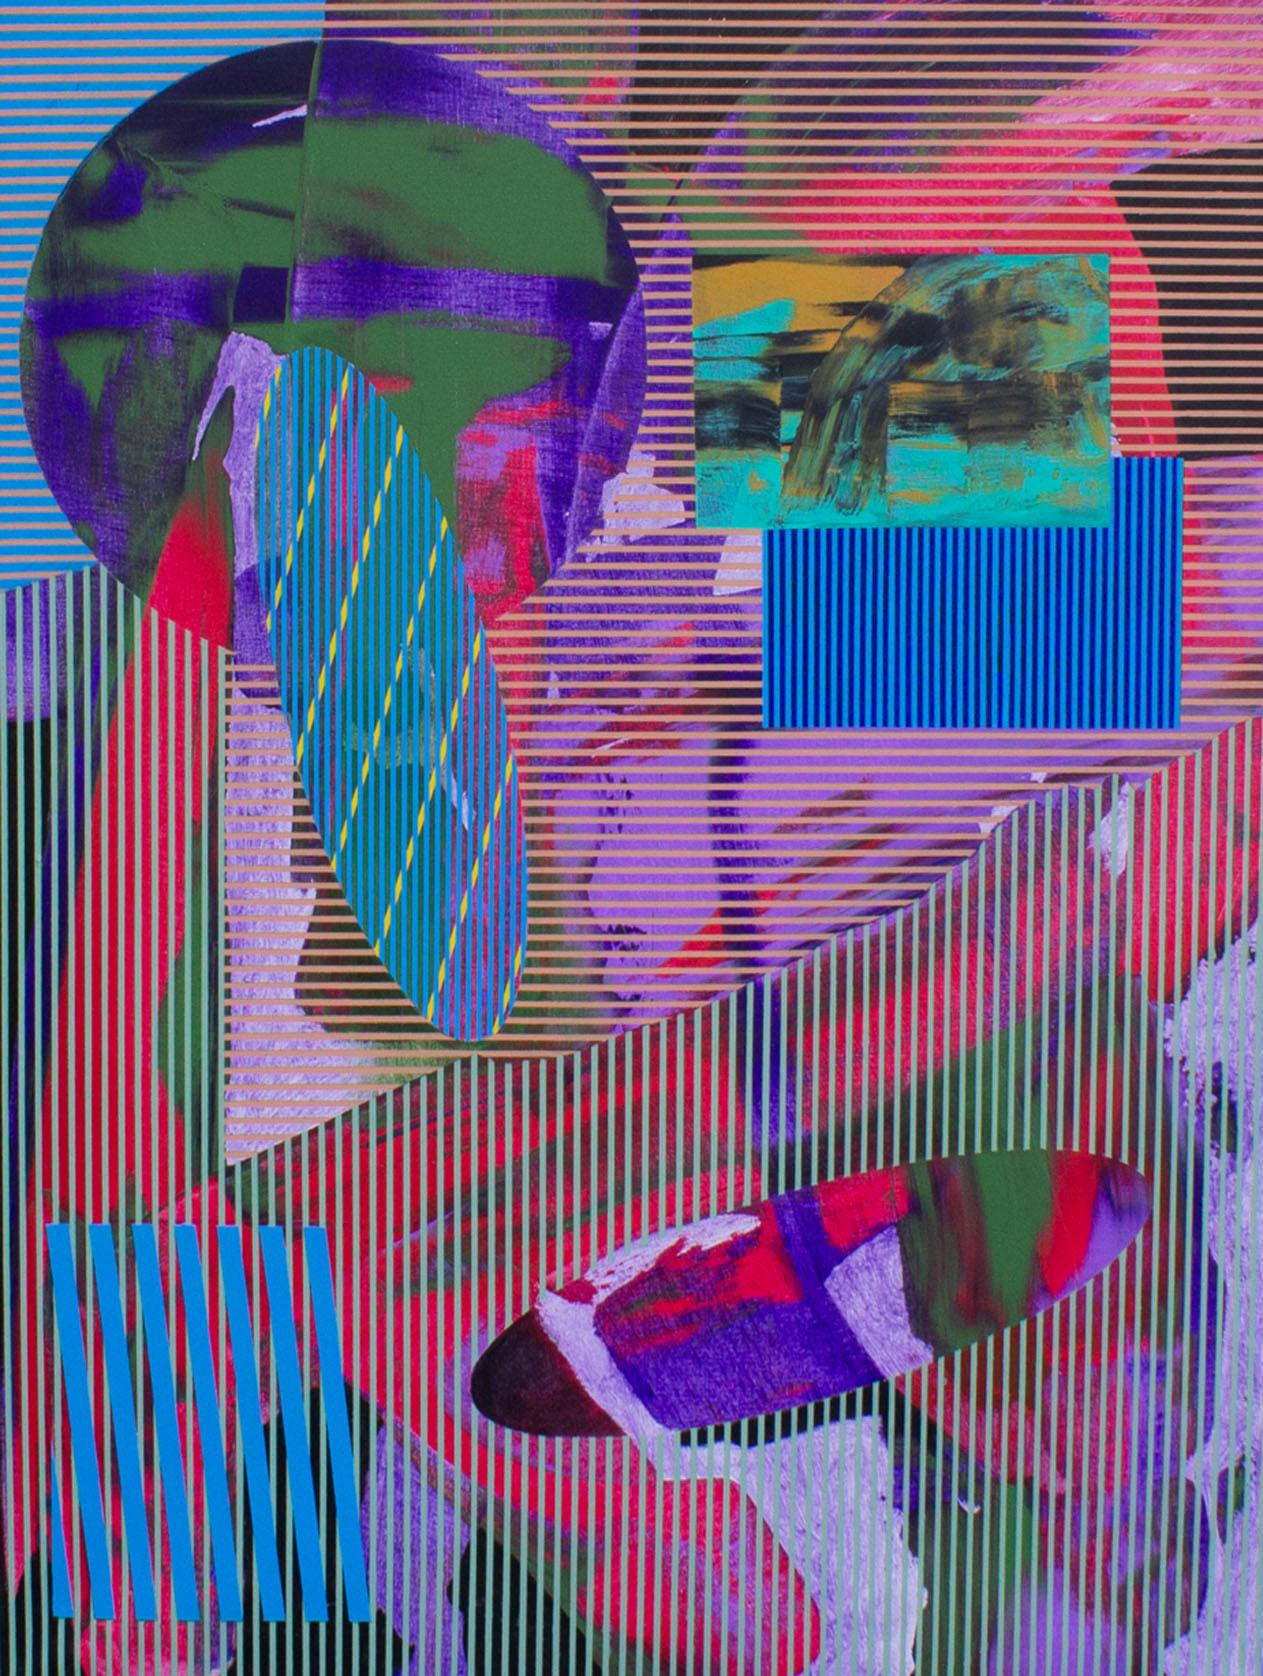 An acrylic on canvas abstract painting by the American artist James Massena March (1953-2021). This vibrant painting depicts overlapping hard lines and shapes over a panoply of color. Thin brushstrokes of hot pink, purple, teal, and black compose